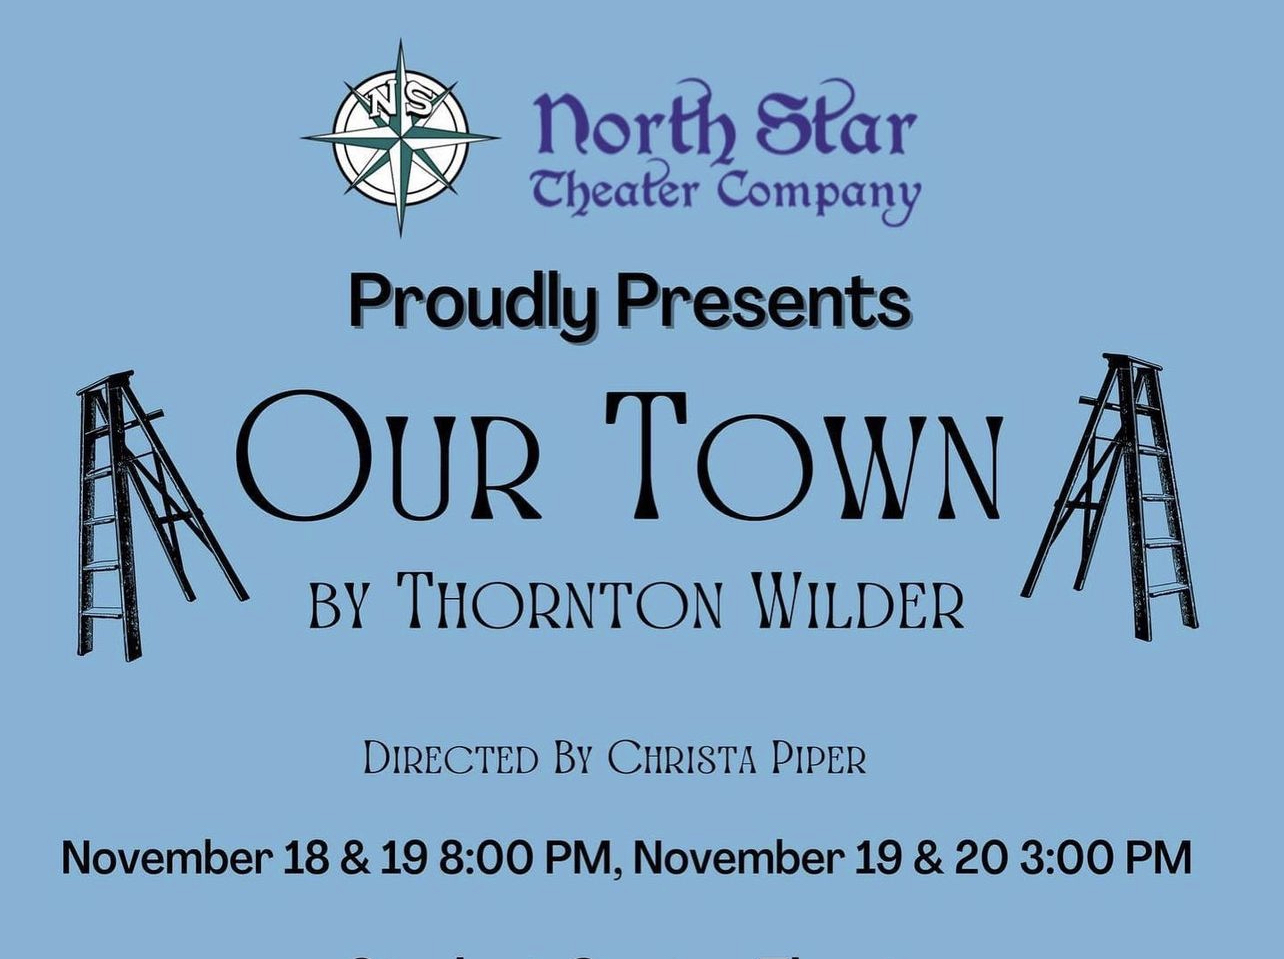 Our Town - North Star Theater Company, Newton, New Jersey, United States